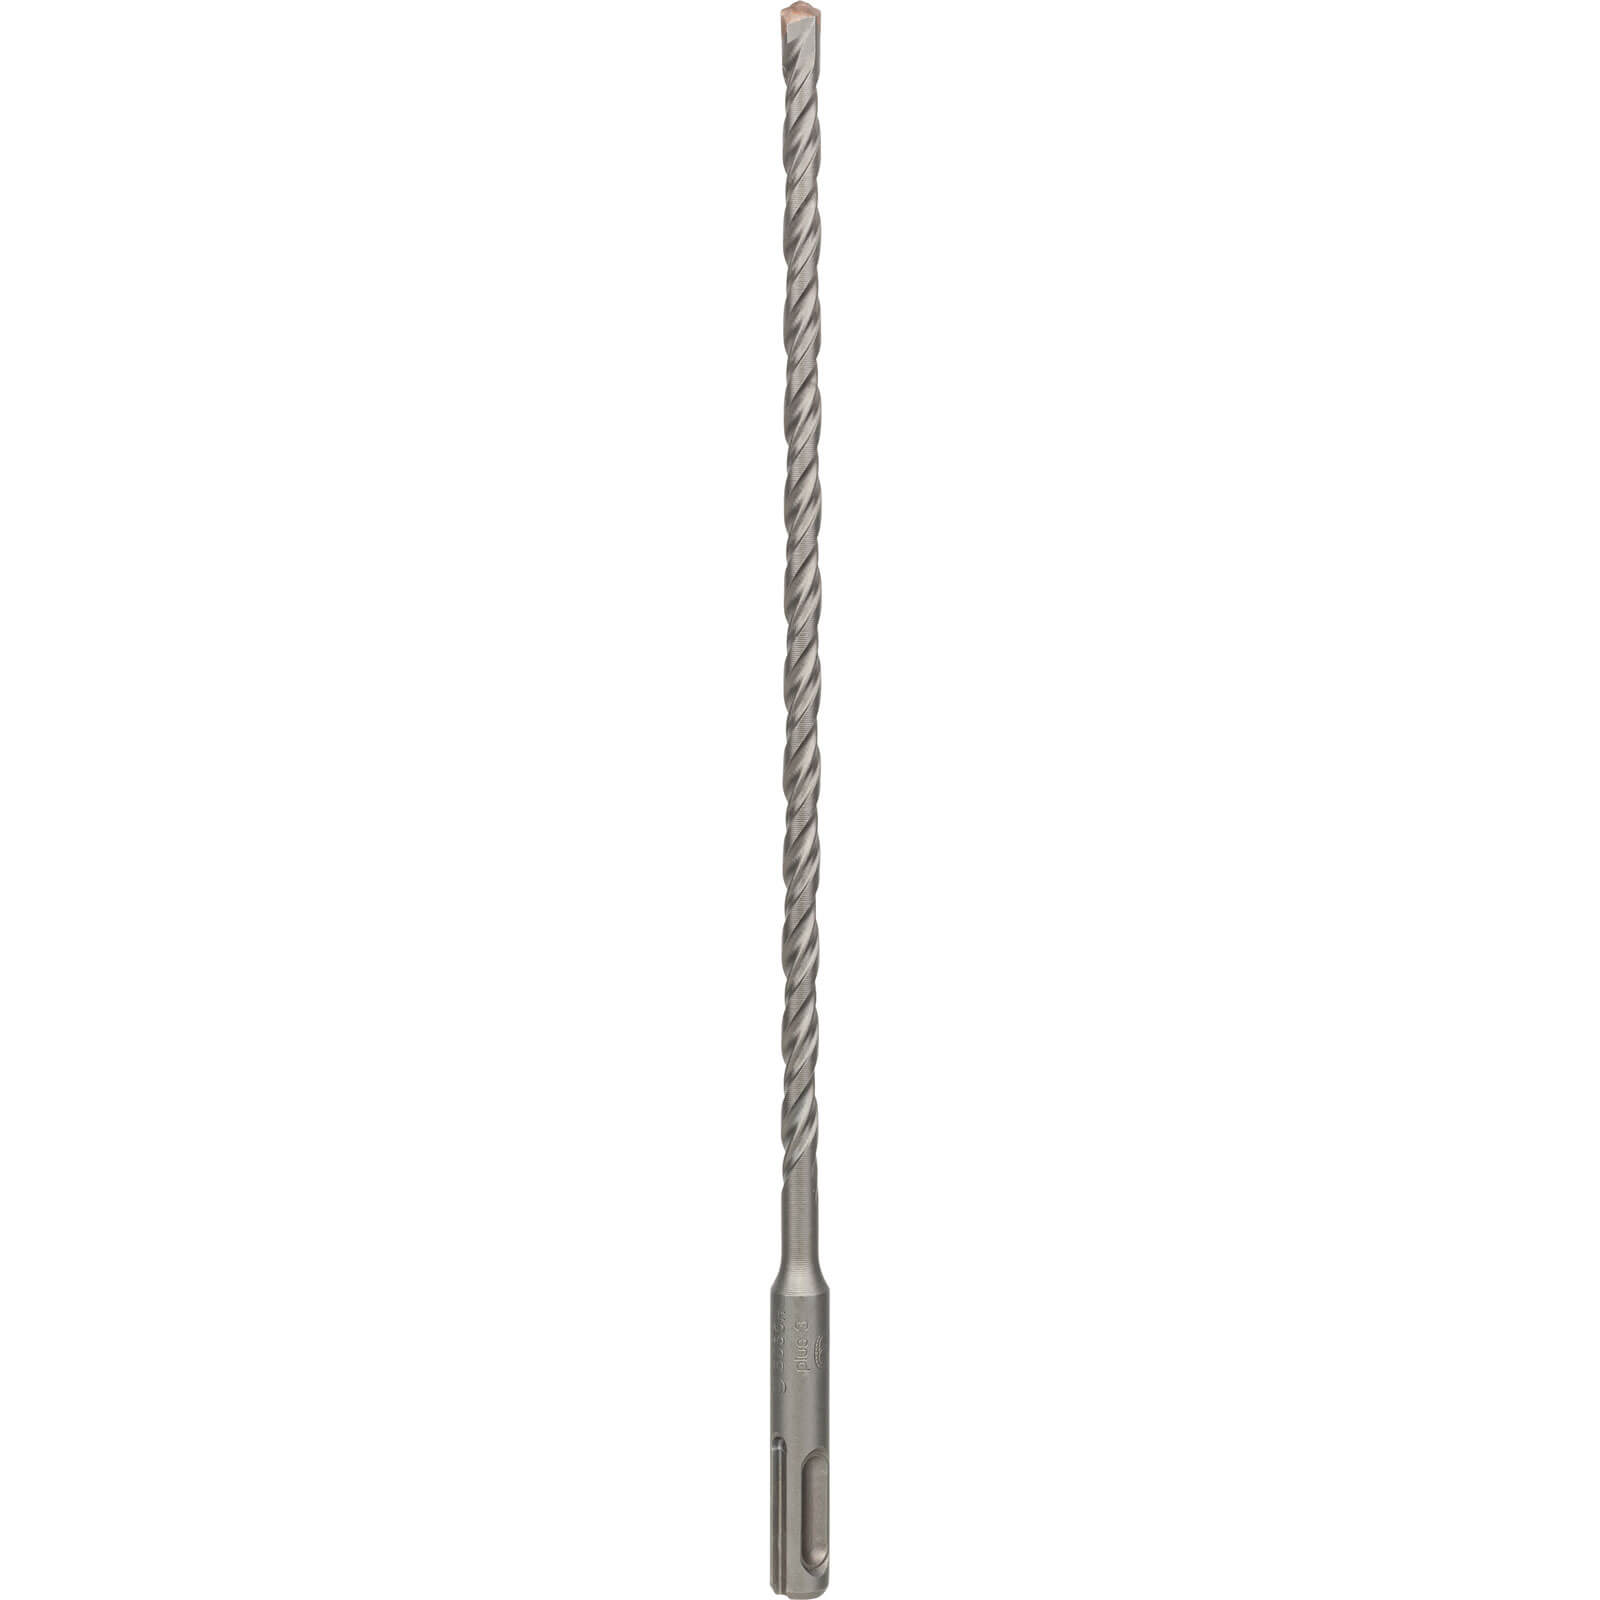 Image of Bosch Series 3 SDS Plus Masonry Drill Bit 6.5mm 260mm Pack of 1